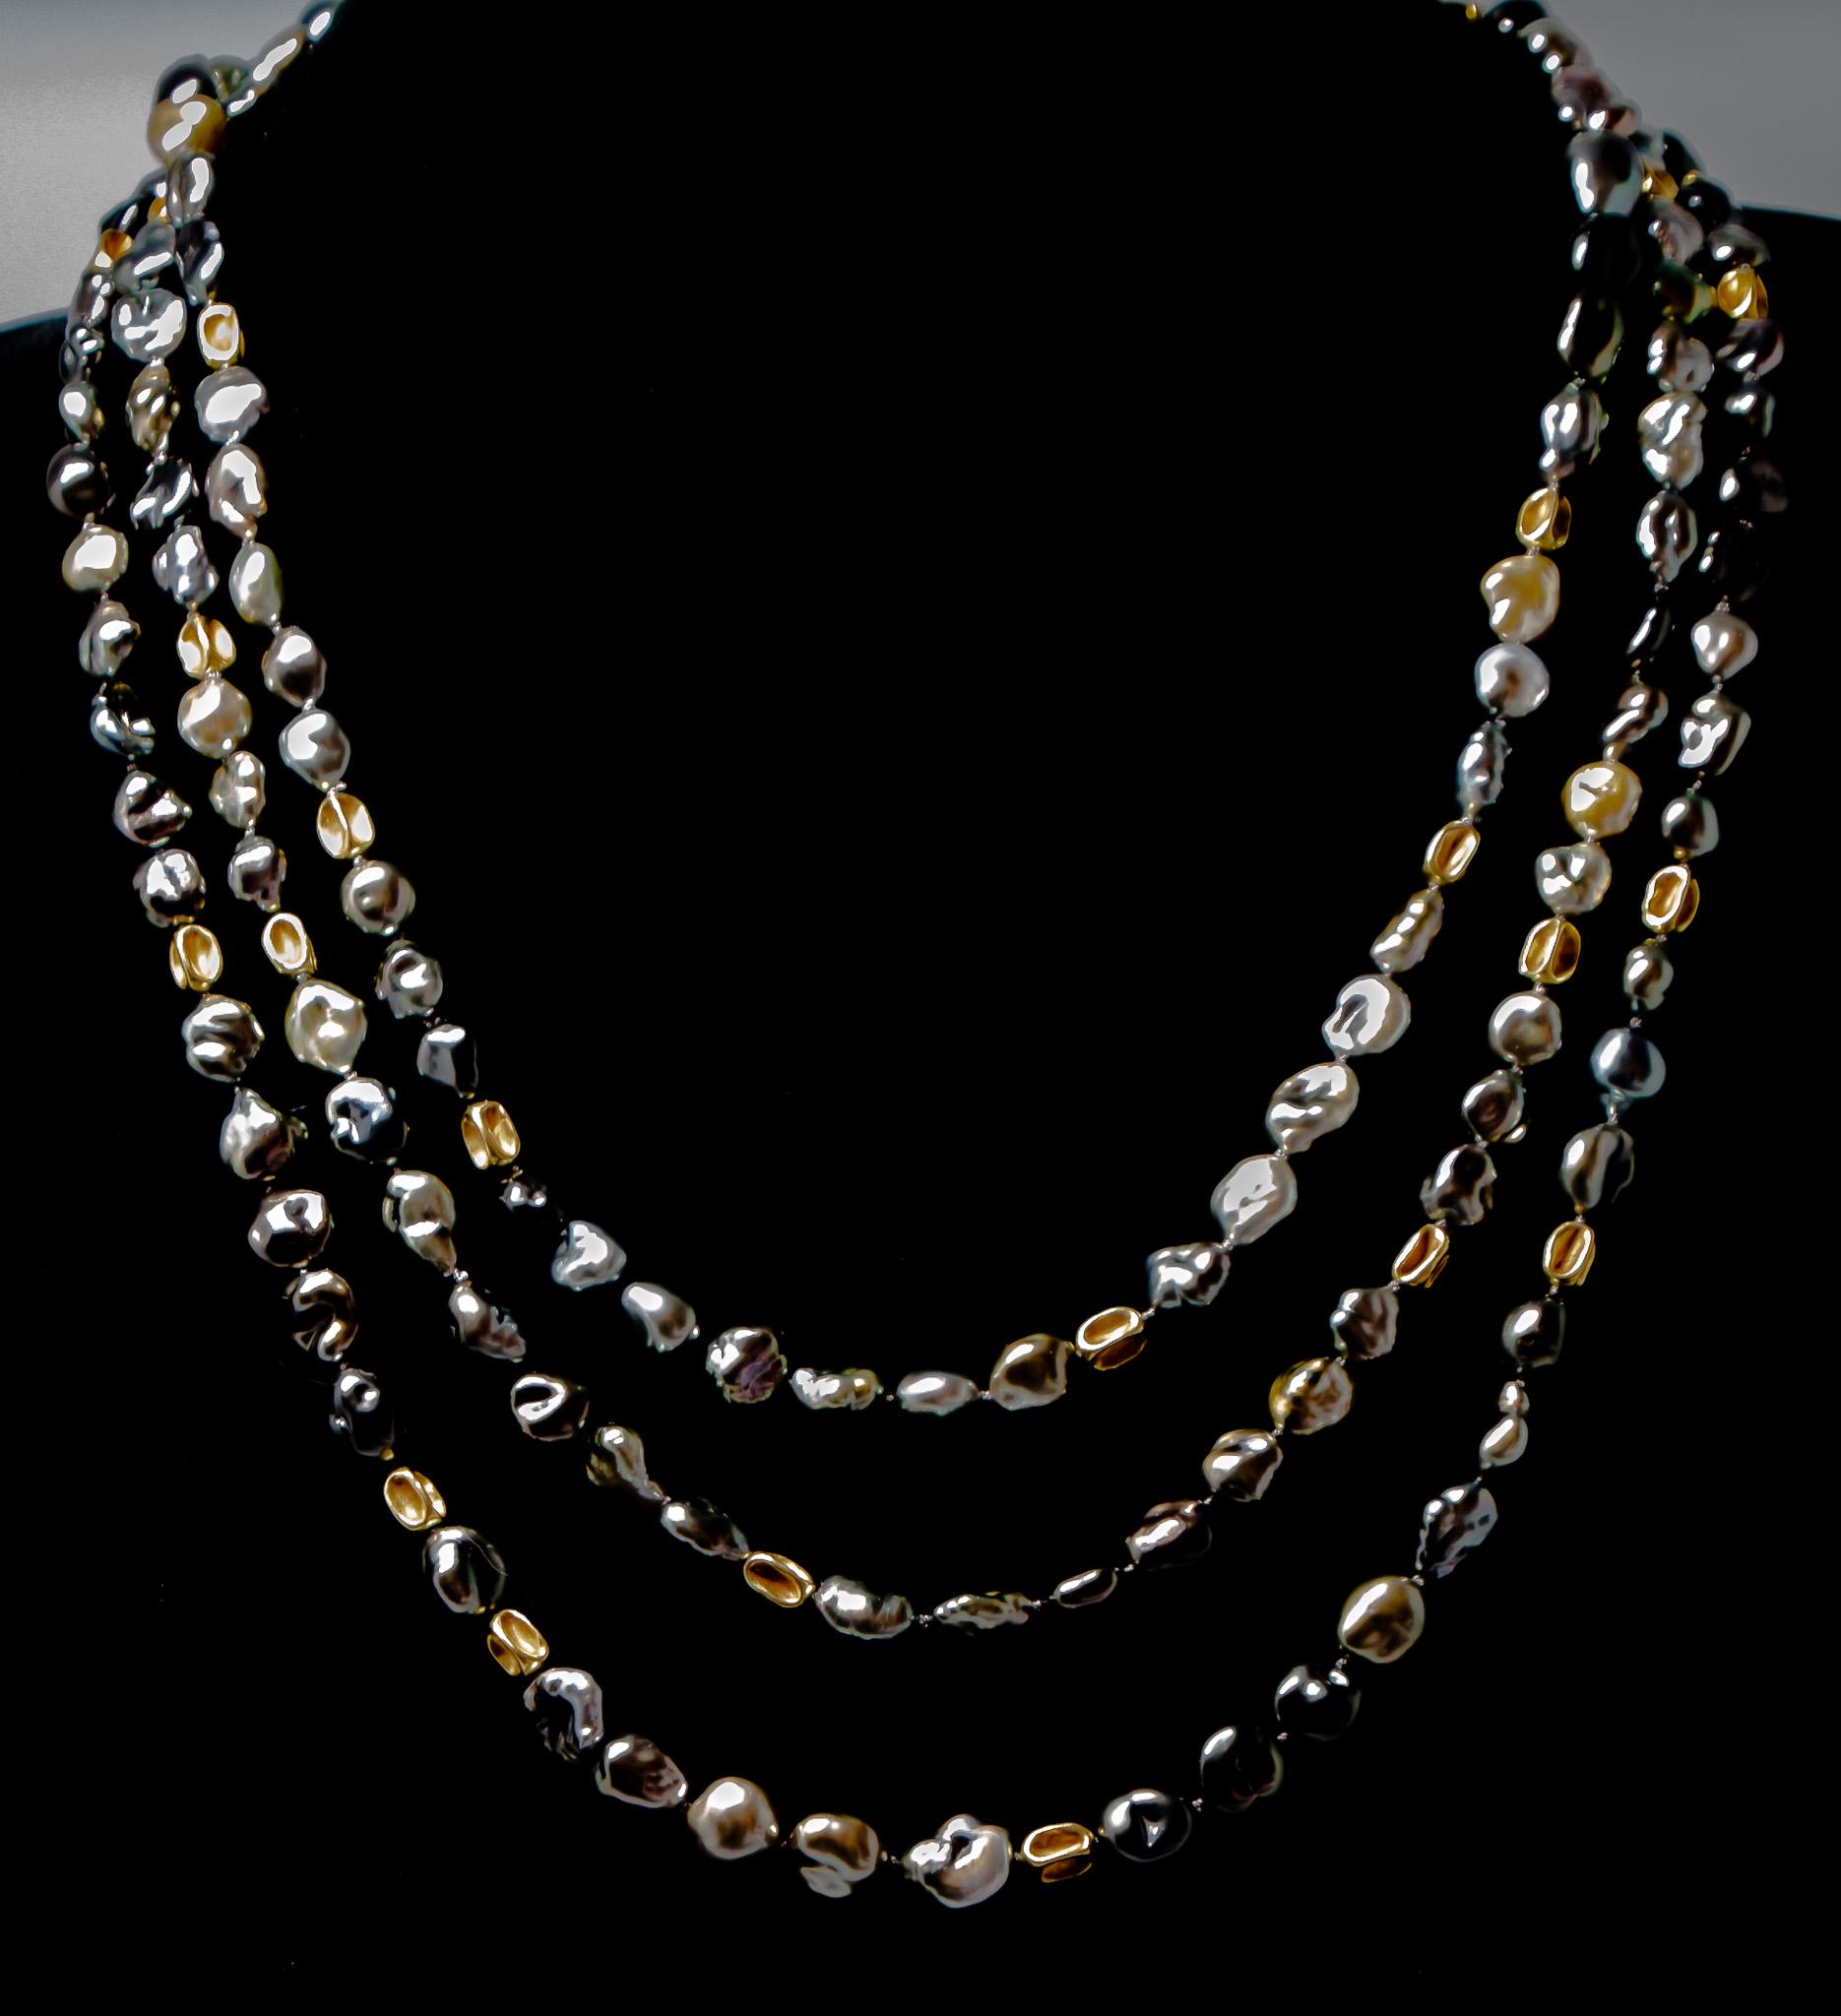 Eighty-five inches of Tahitian pearl bliss - Keshi pearls with 18K gold accent beads shown wrapped three times for a princess-length look